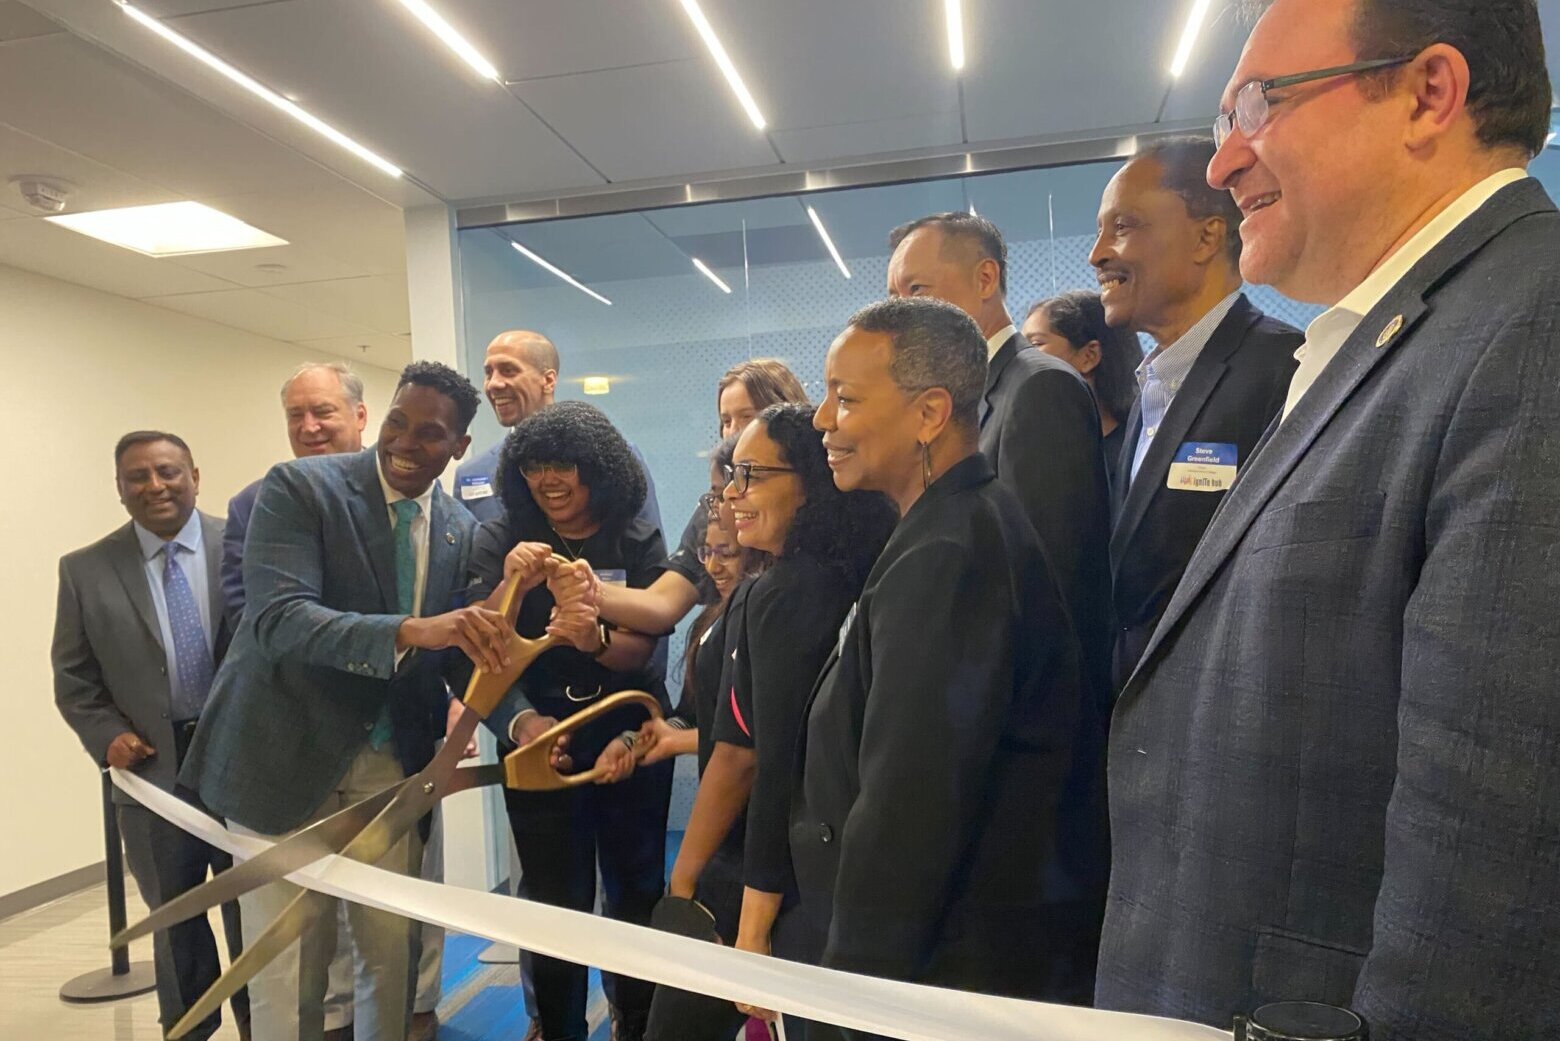 Community technology center opens in Montgomery Co.